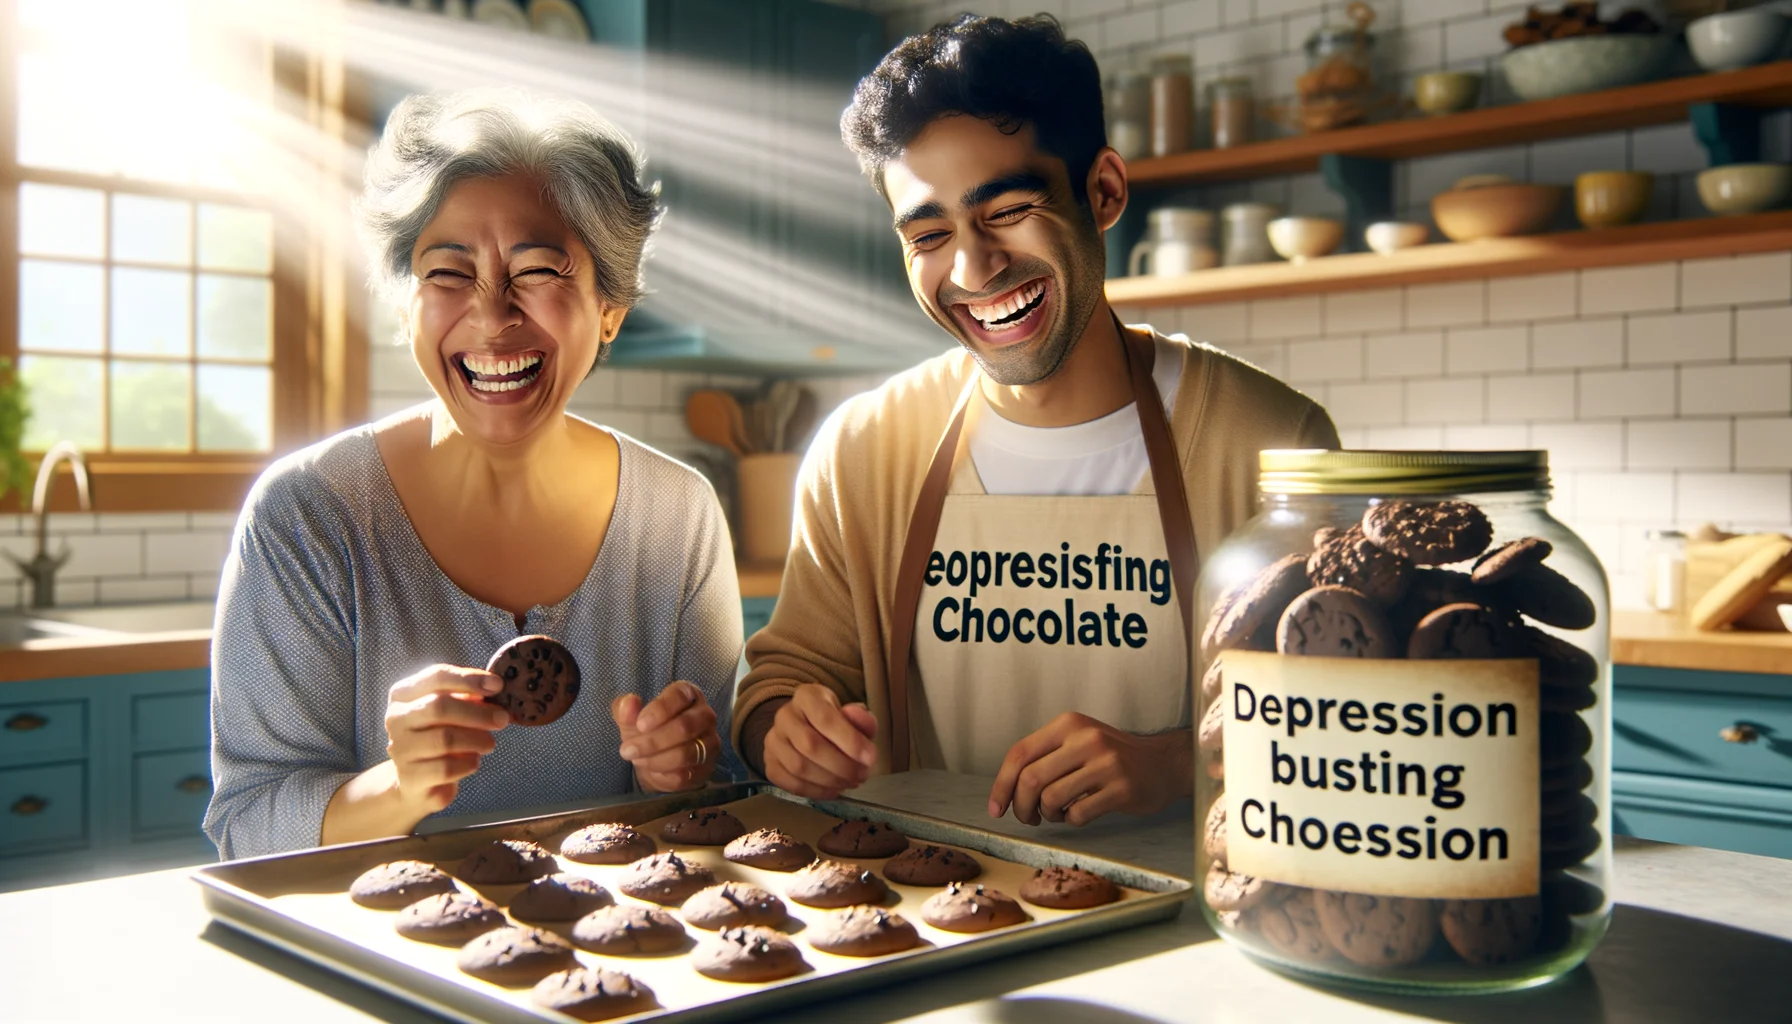 Imagine a sunny kitchen scene where a middle-aged Hispanic woman and a young South Asian man are laughing heartily. They're enjoying a freshly baked batch of gleaming chocolate cookies, which have an aura that emits positivity and tranquility. They both wear shirts that say 'Mood-Lifting Chocolate for Depression'. The air is filled with delicious chocolate scent and rays of sunshine, reinforcing the uplifting vibe. Beside them, a jar labeled 'Depression-Busting Chocolate' stands proud, brimming with yummy, shiny chocolates. The chocolate glimmers with a soft glow, reflecting a hopeful and cheerful mood.